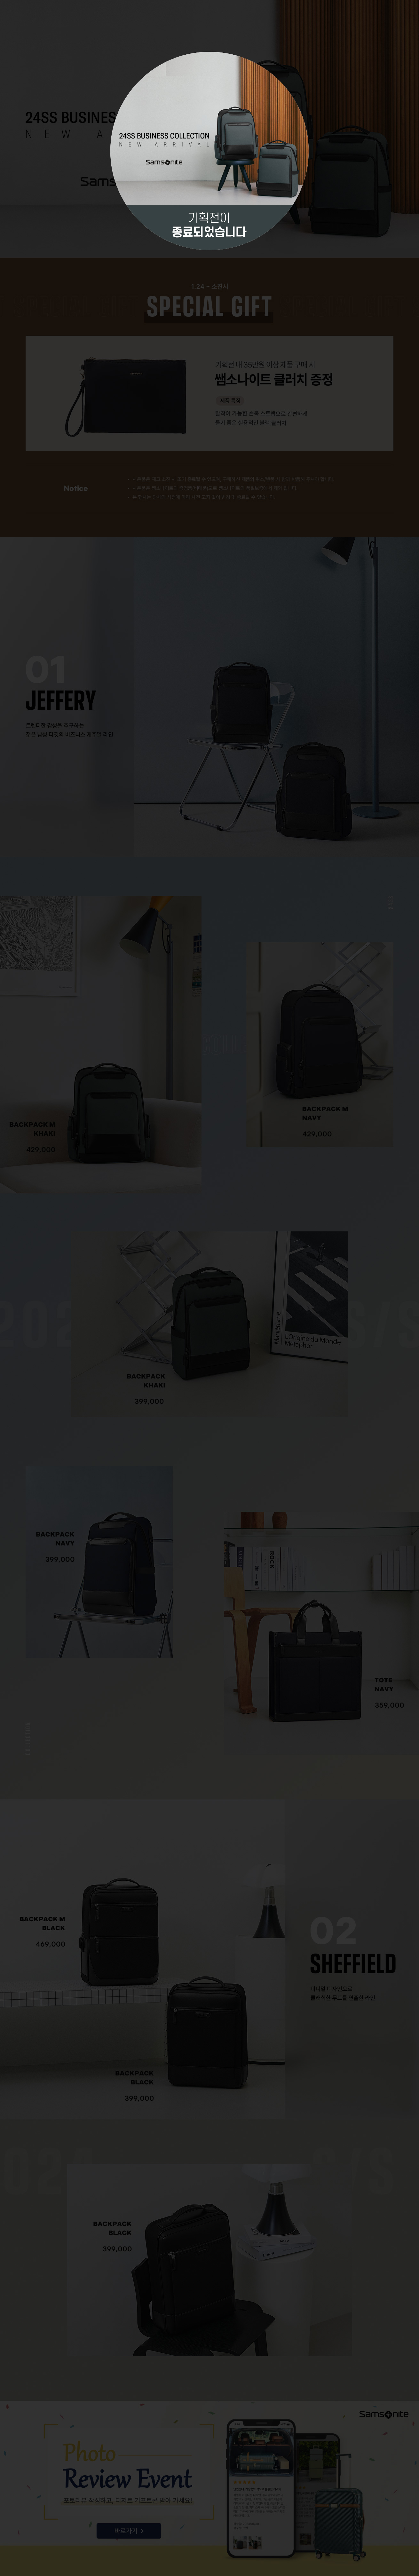 24SS BUSINESS COLLECTION NEW ARRIVAL Samsonite 기획전이 종료되었습니다